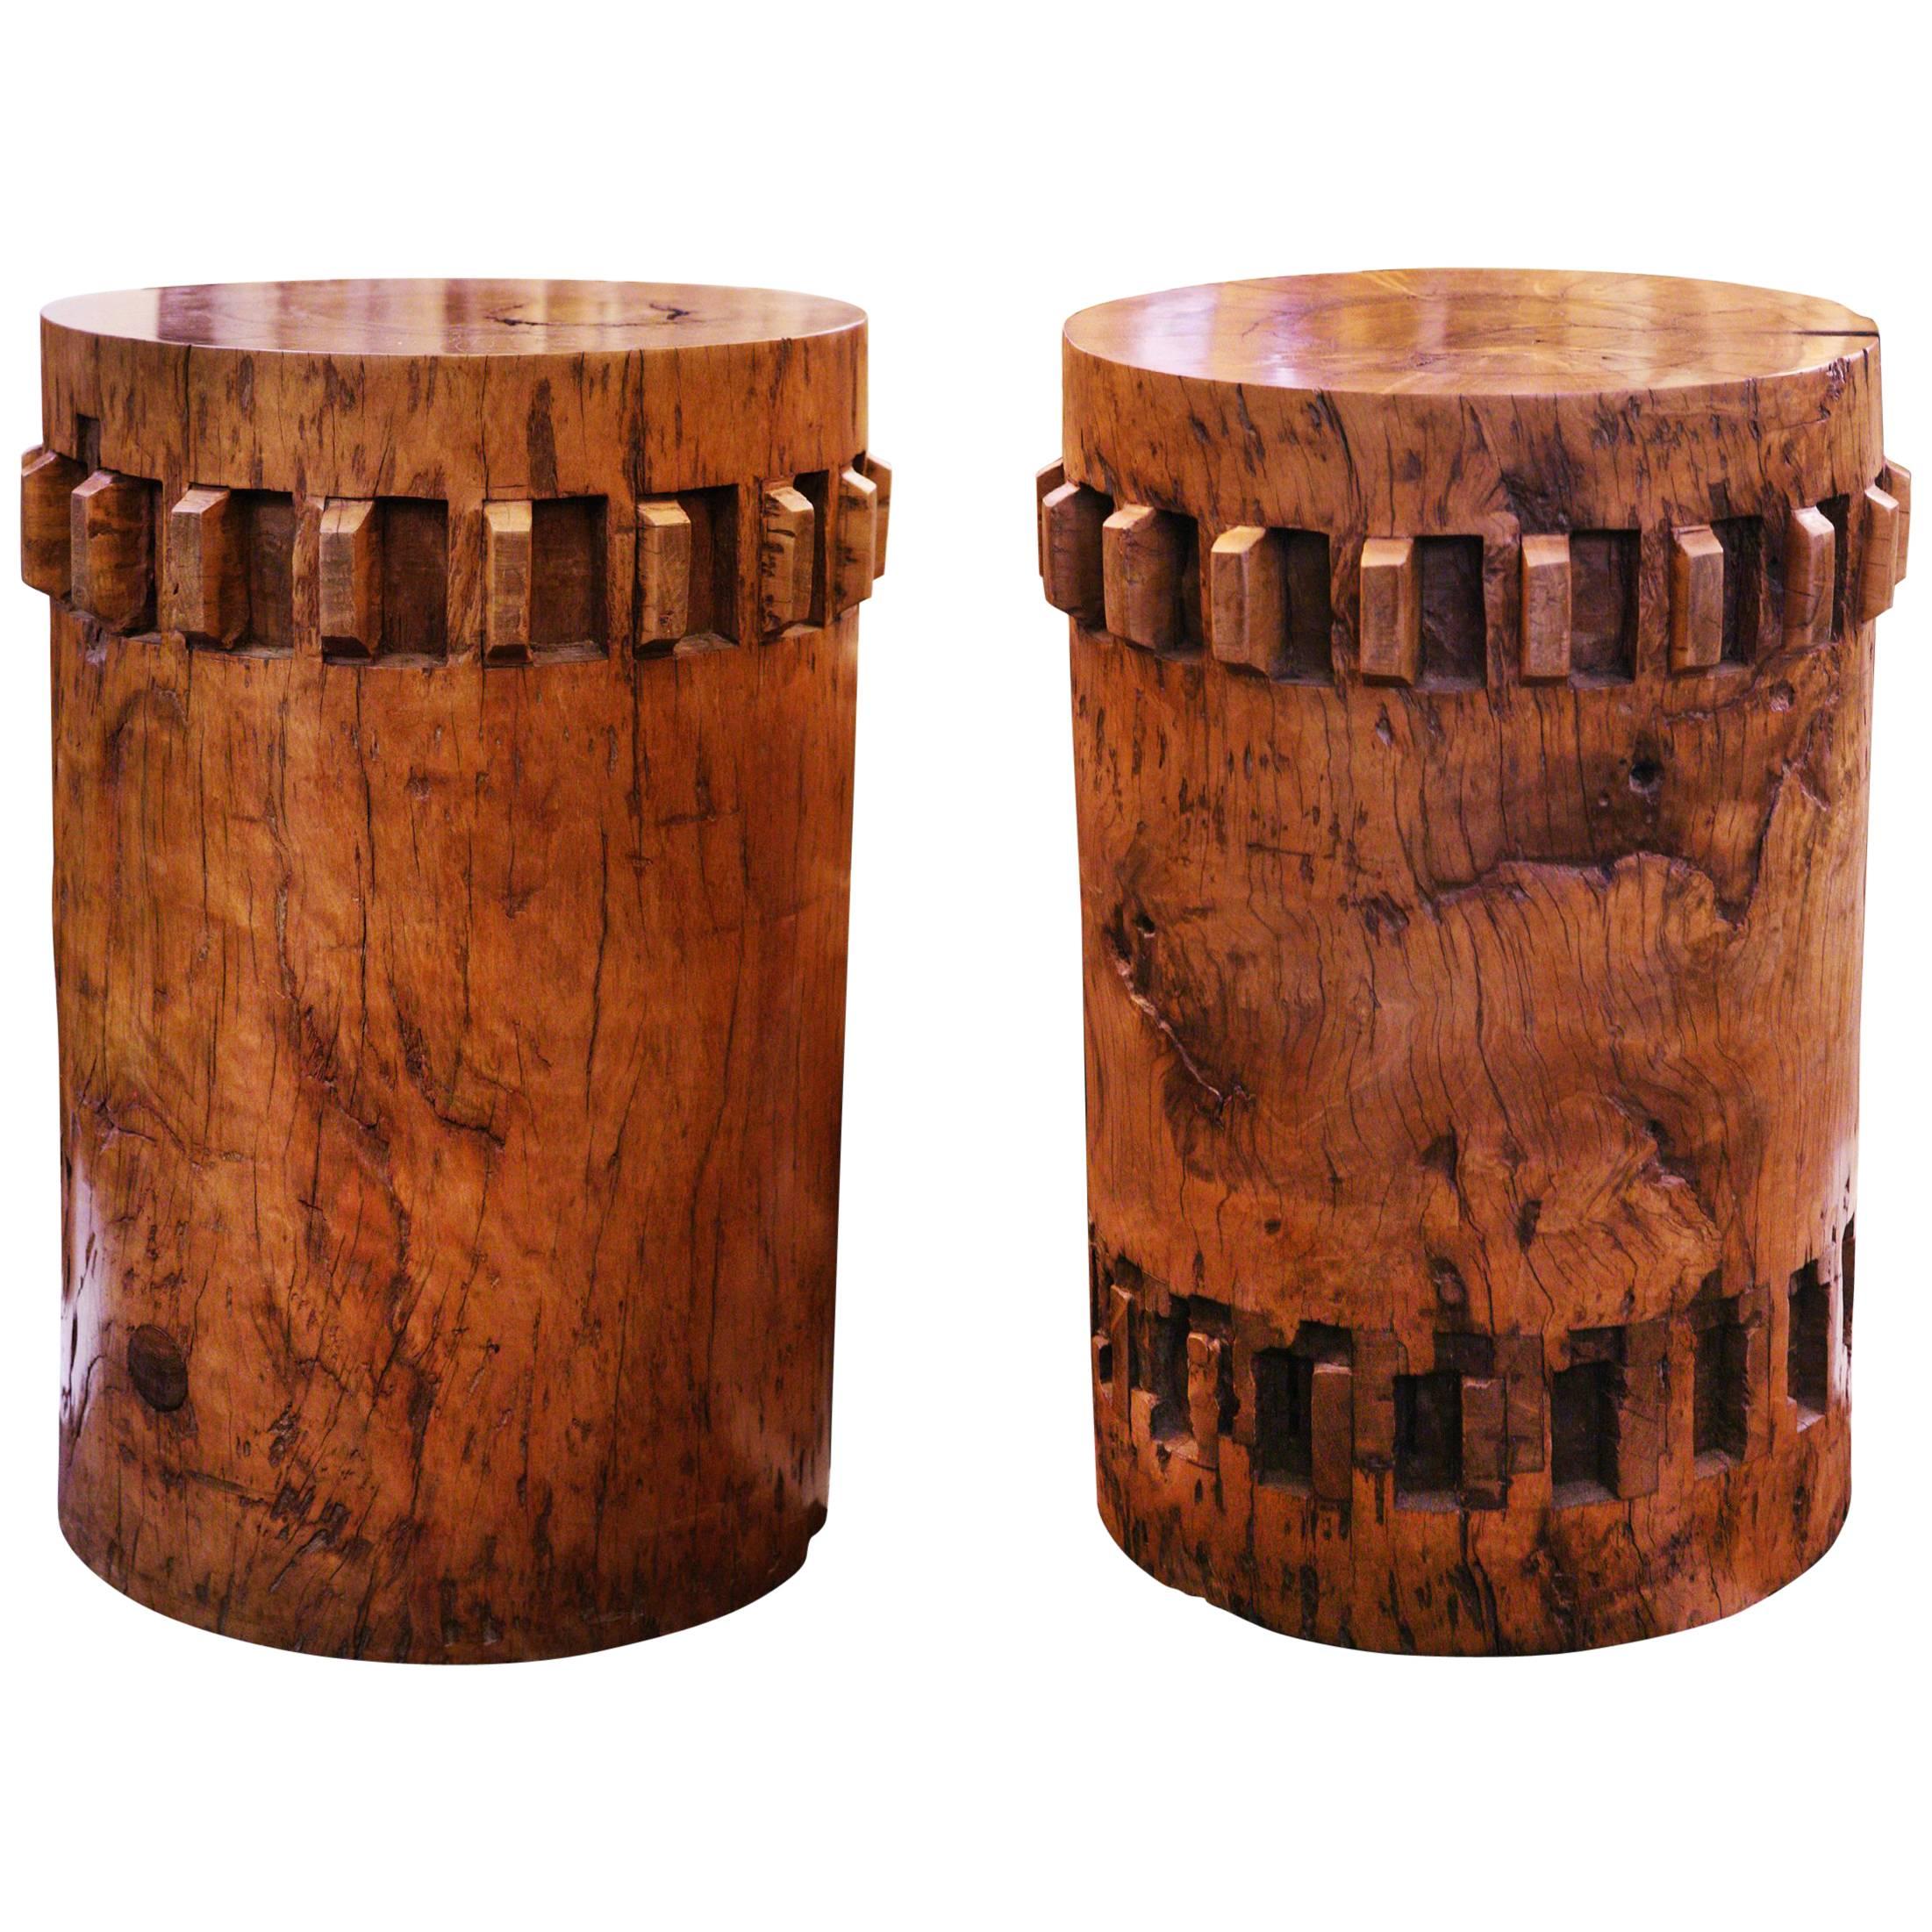 Sugar Cane Breakers Set of Two Pedestals in Solid Nara Wood